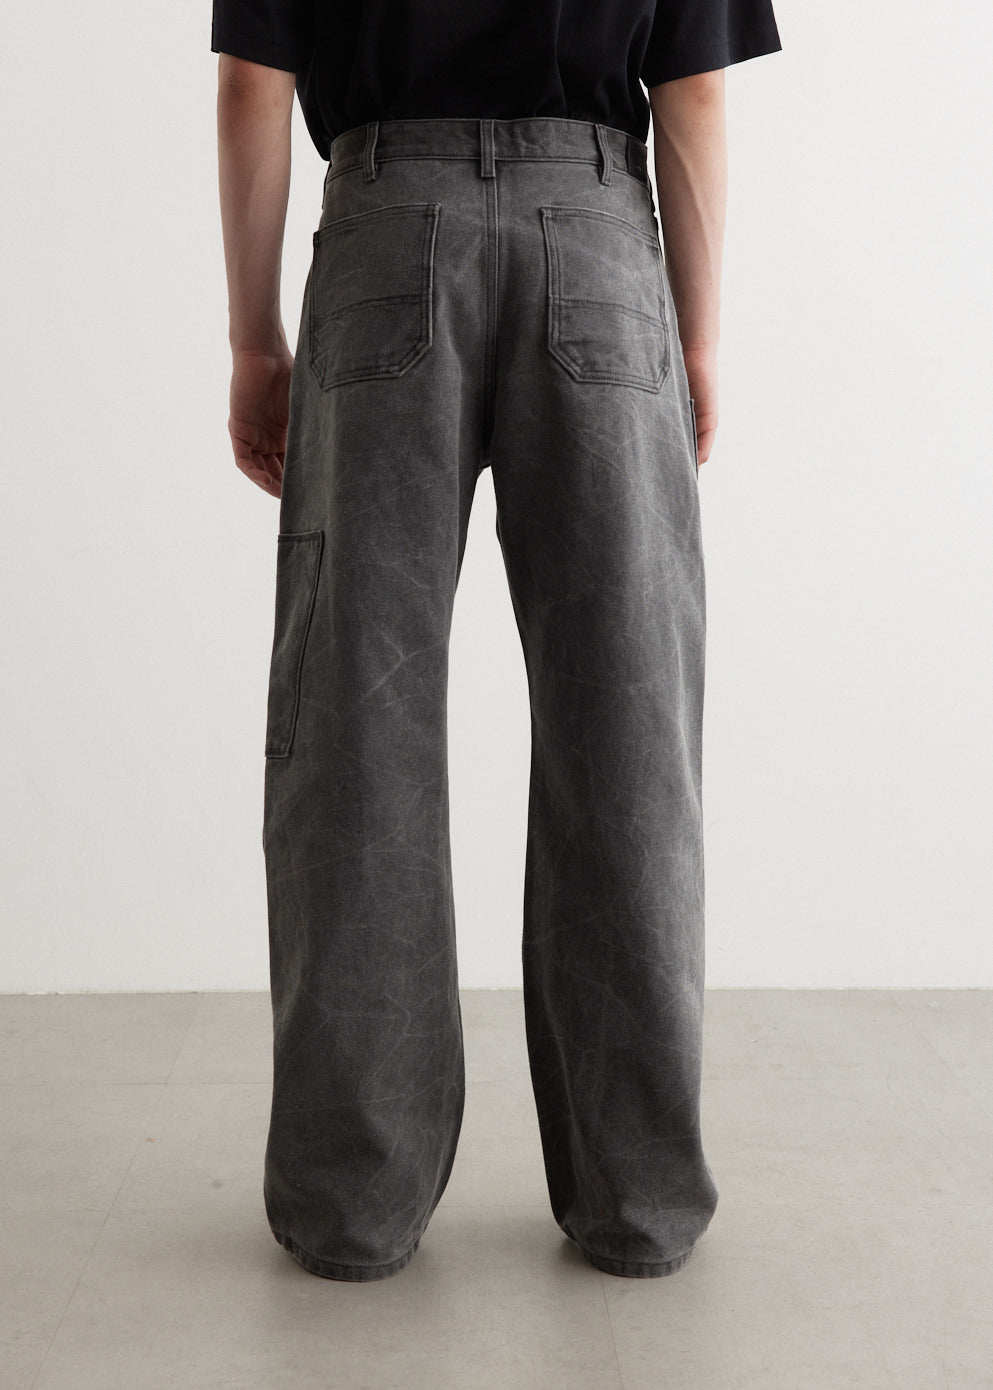 The Patch Pocket Trouser – Flax London